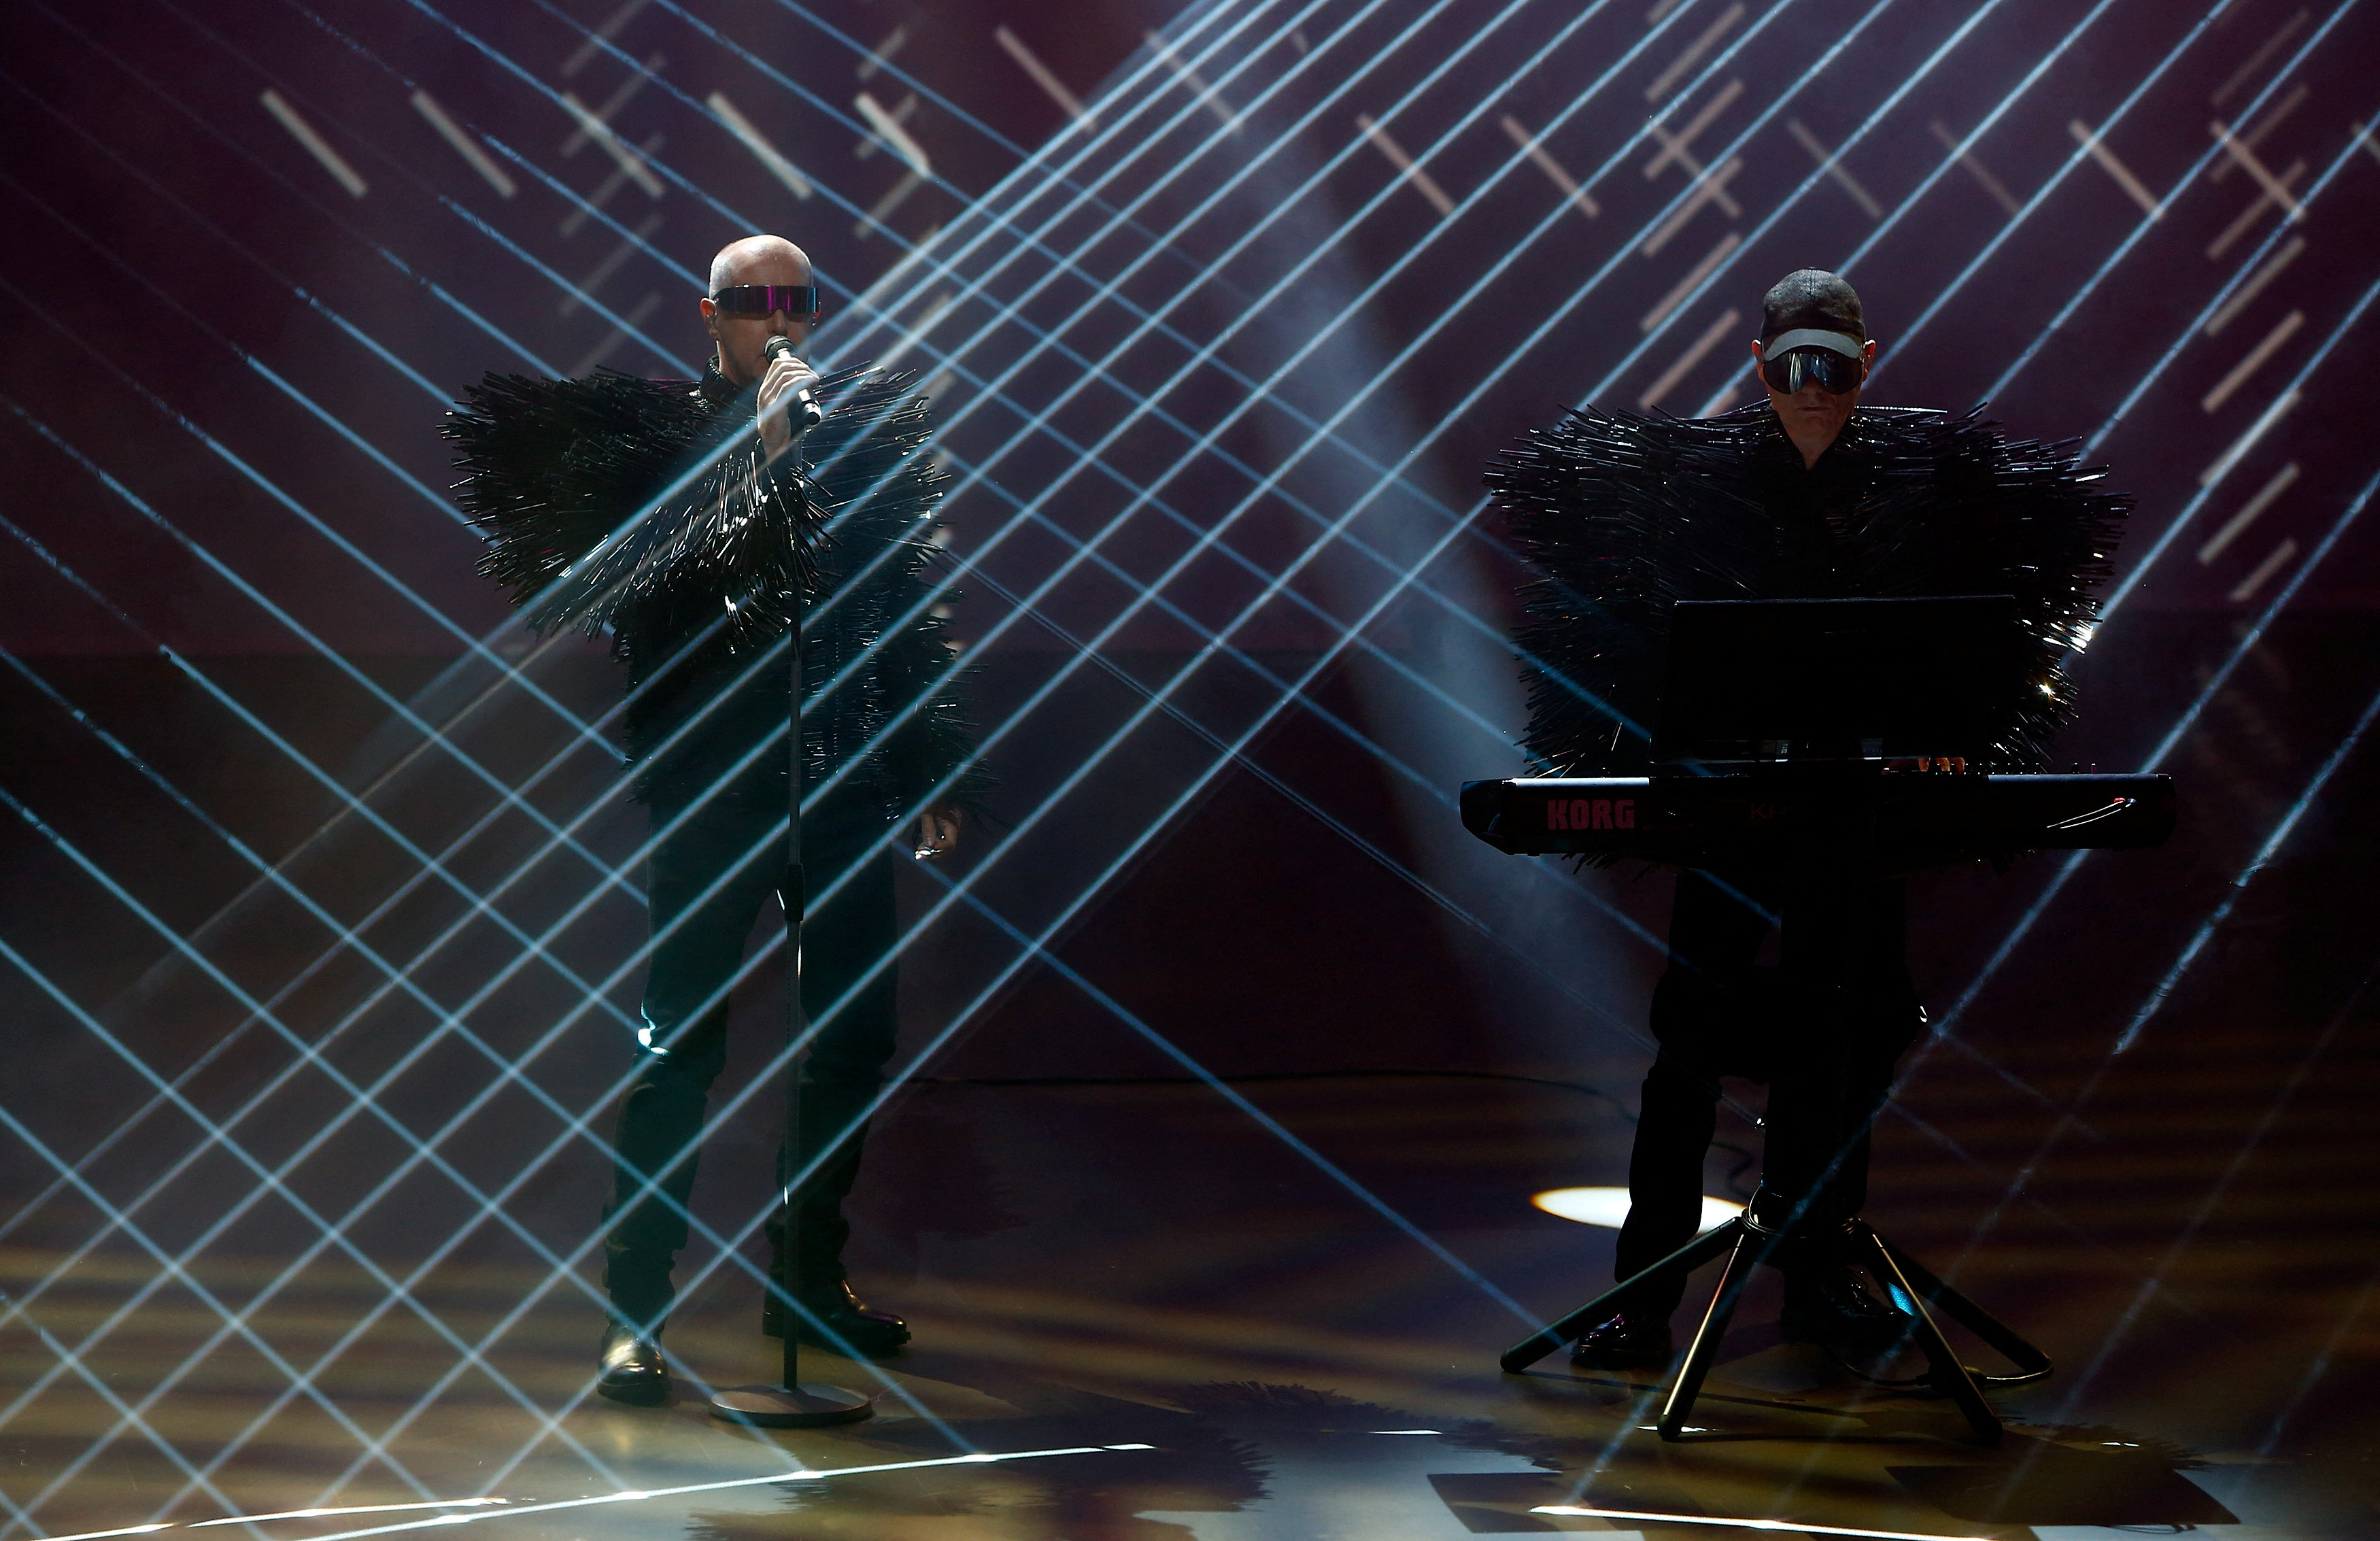 The Pet Shop Boys perform during the Volkswagen group night at the Frankfurt motor show